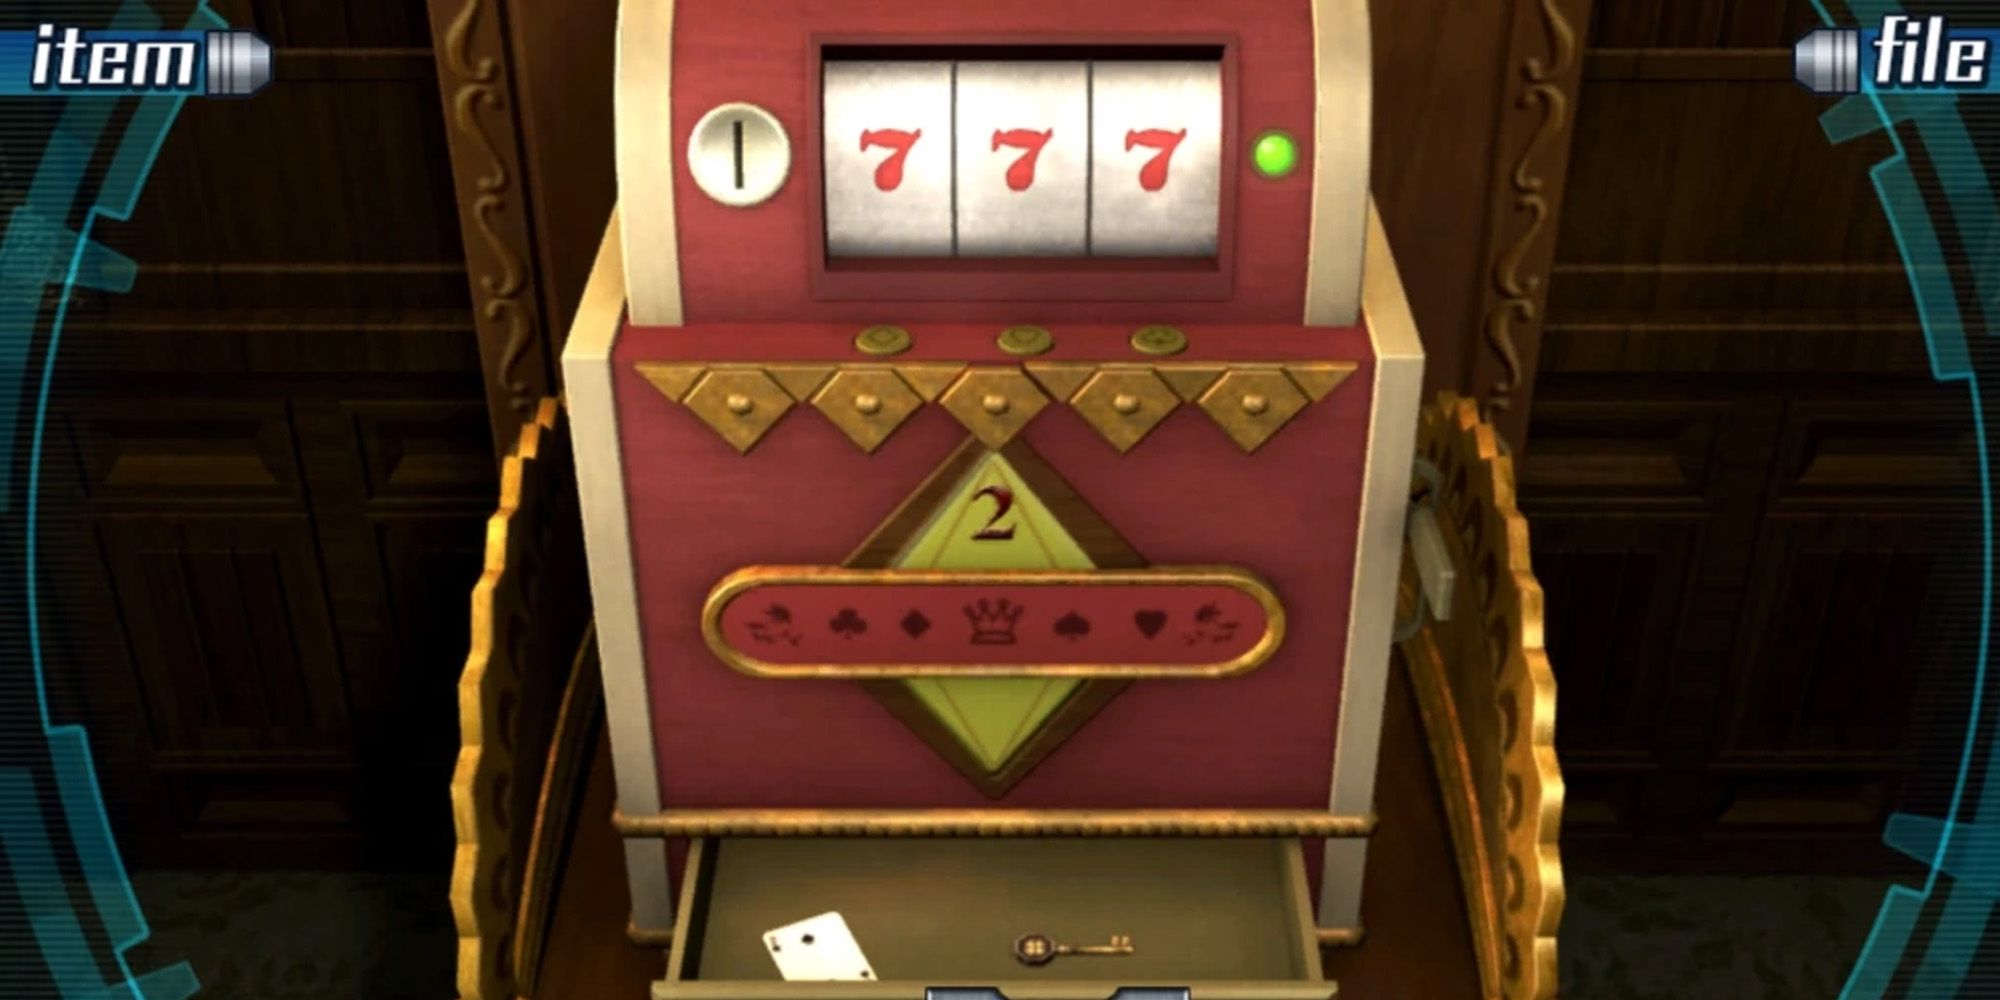 The Slot Machine Puzzle Found In The Casino Room. The Venus Key And Card 2 Can Be Obtained Upon Solving It